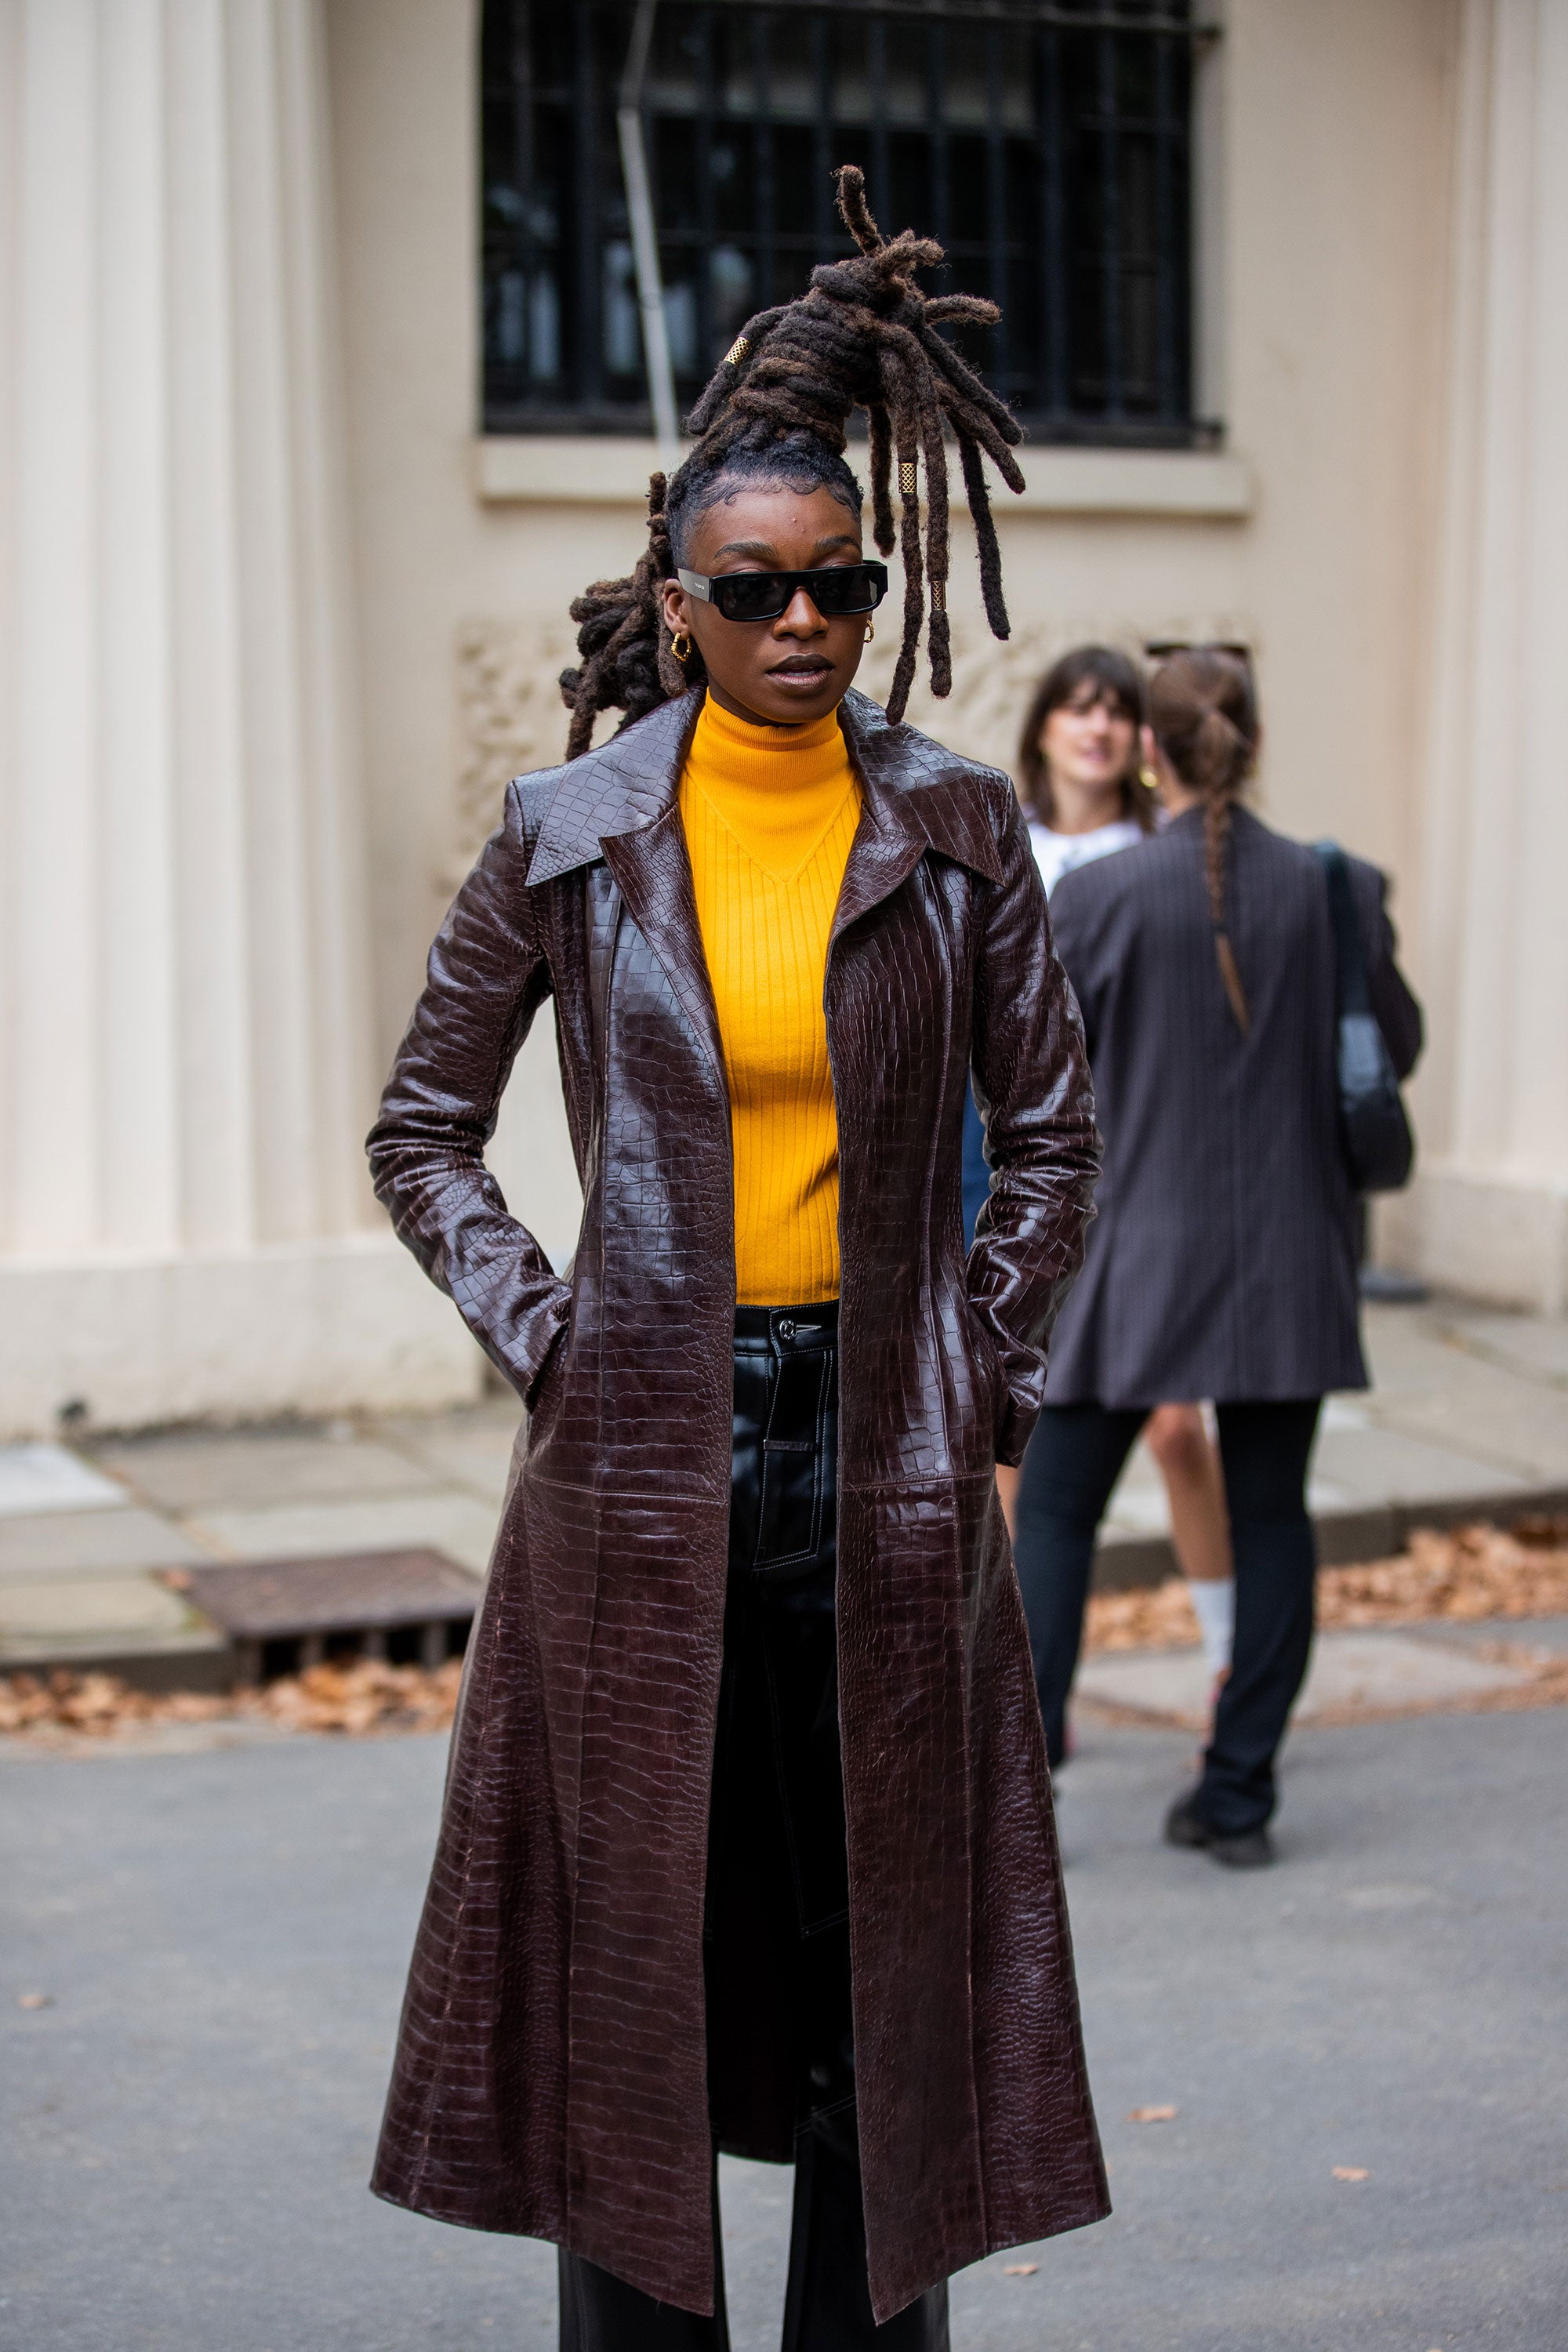 The Best Street-Style Bags from Fashion Week SS22